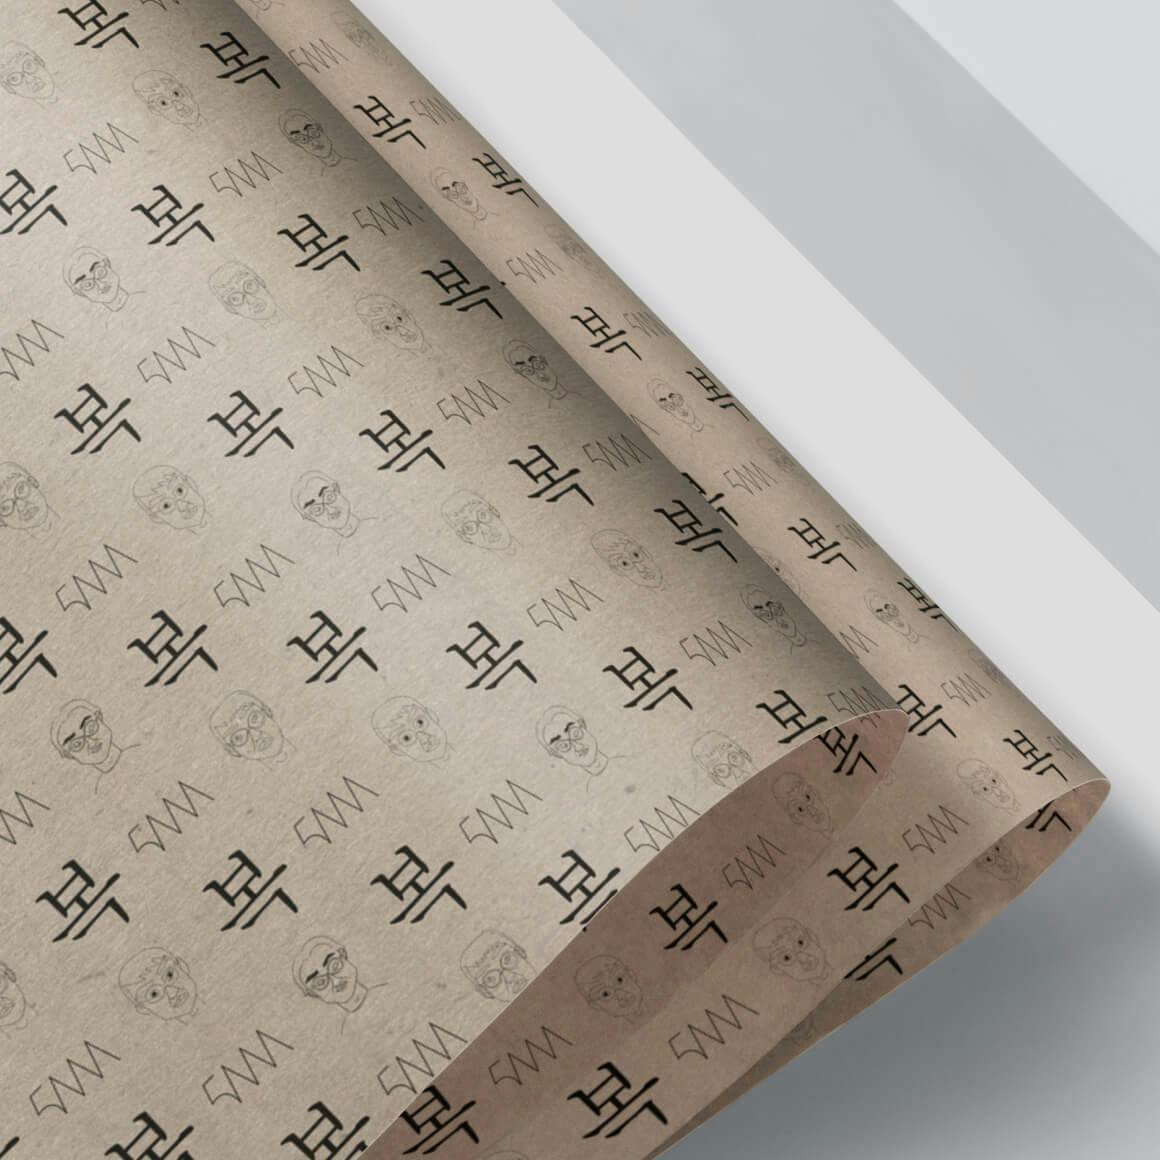 Mockup of wrapping paper which features a proprietary pattern of Shawn S. Chois monogram, caricature, and character/symbols.